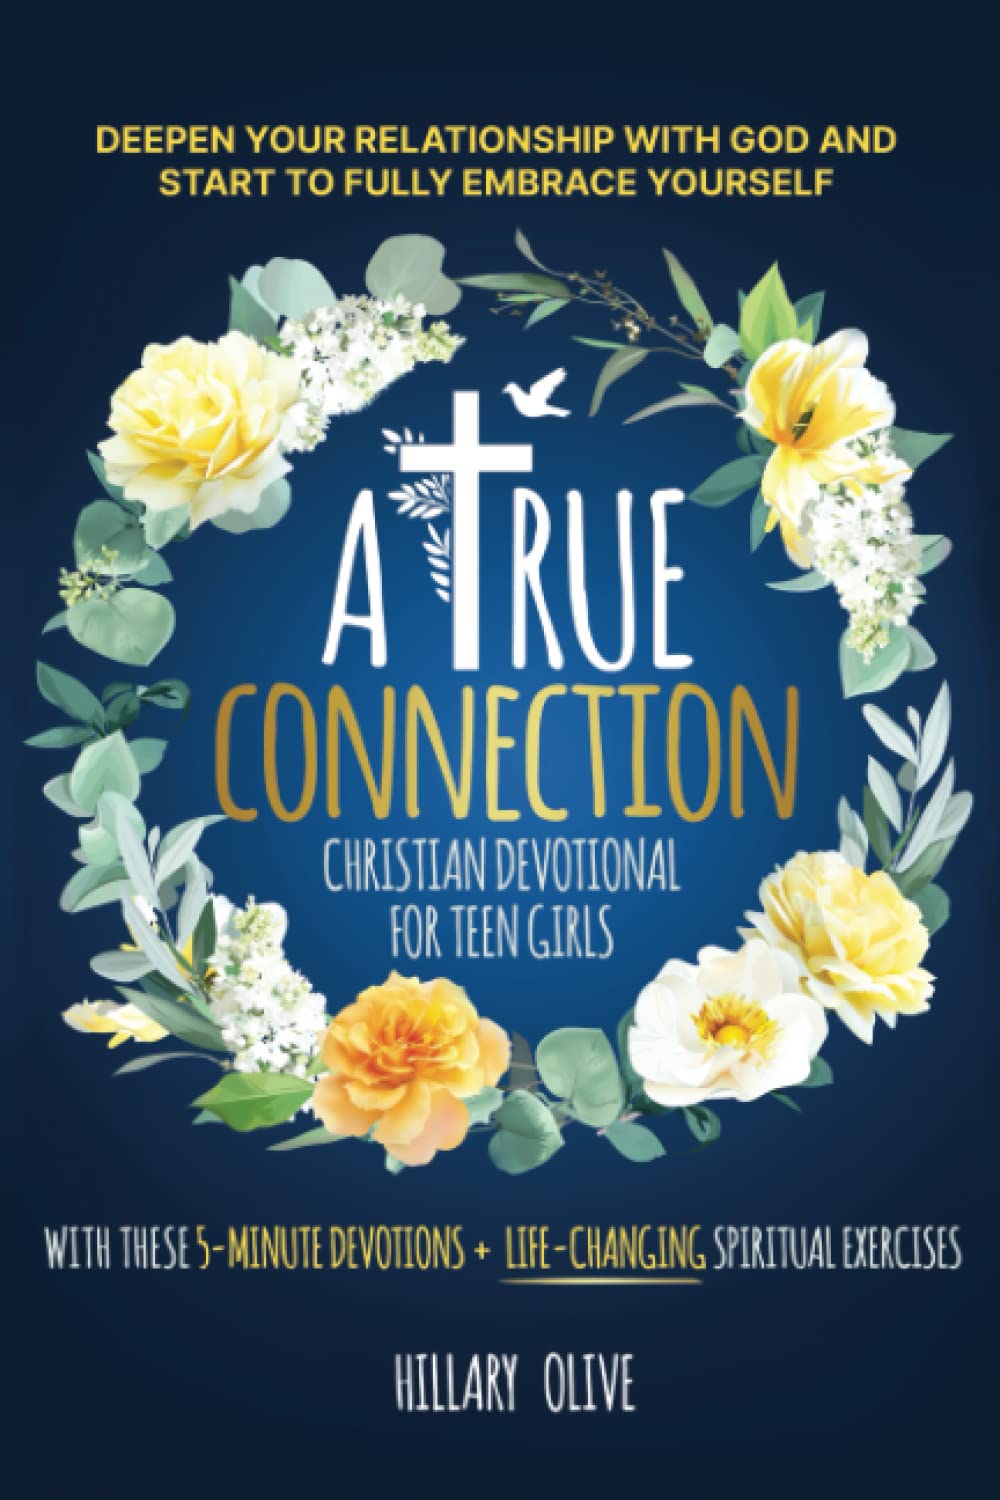 A True Connection - Christian Devotional For Teen Girls: Deepen Your Relationship with God and Start to Fully Embrace Yourself with these 5-minute Devotions + Life-Changing Spiritual Exercises